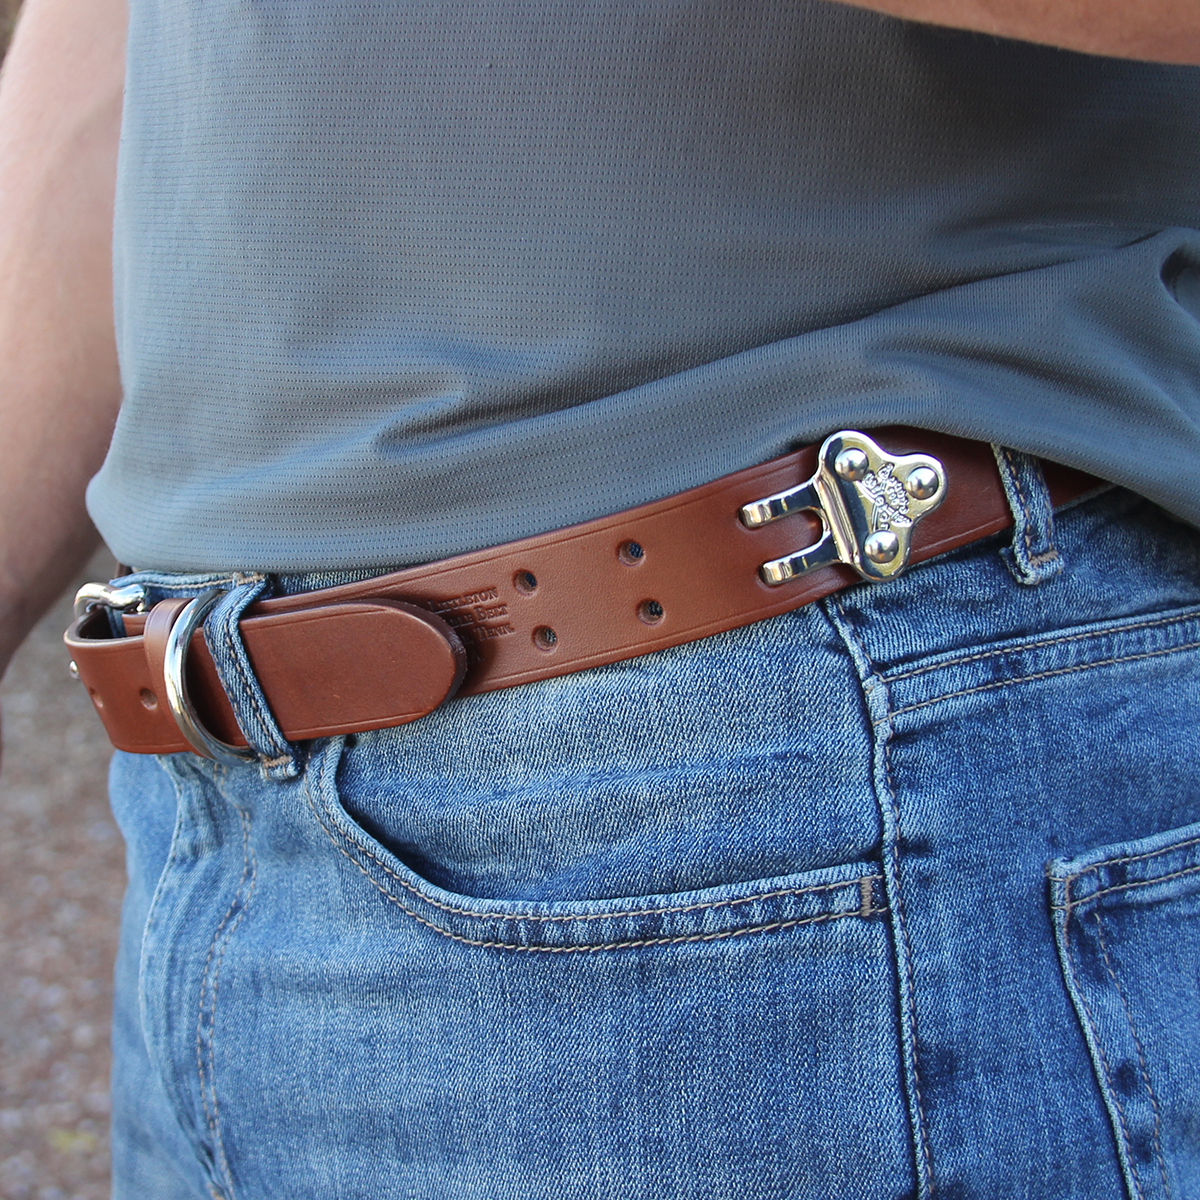 Adjustable Leather Belt, No. 1 - One Size Fits Most, USA Made